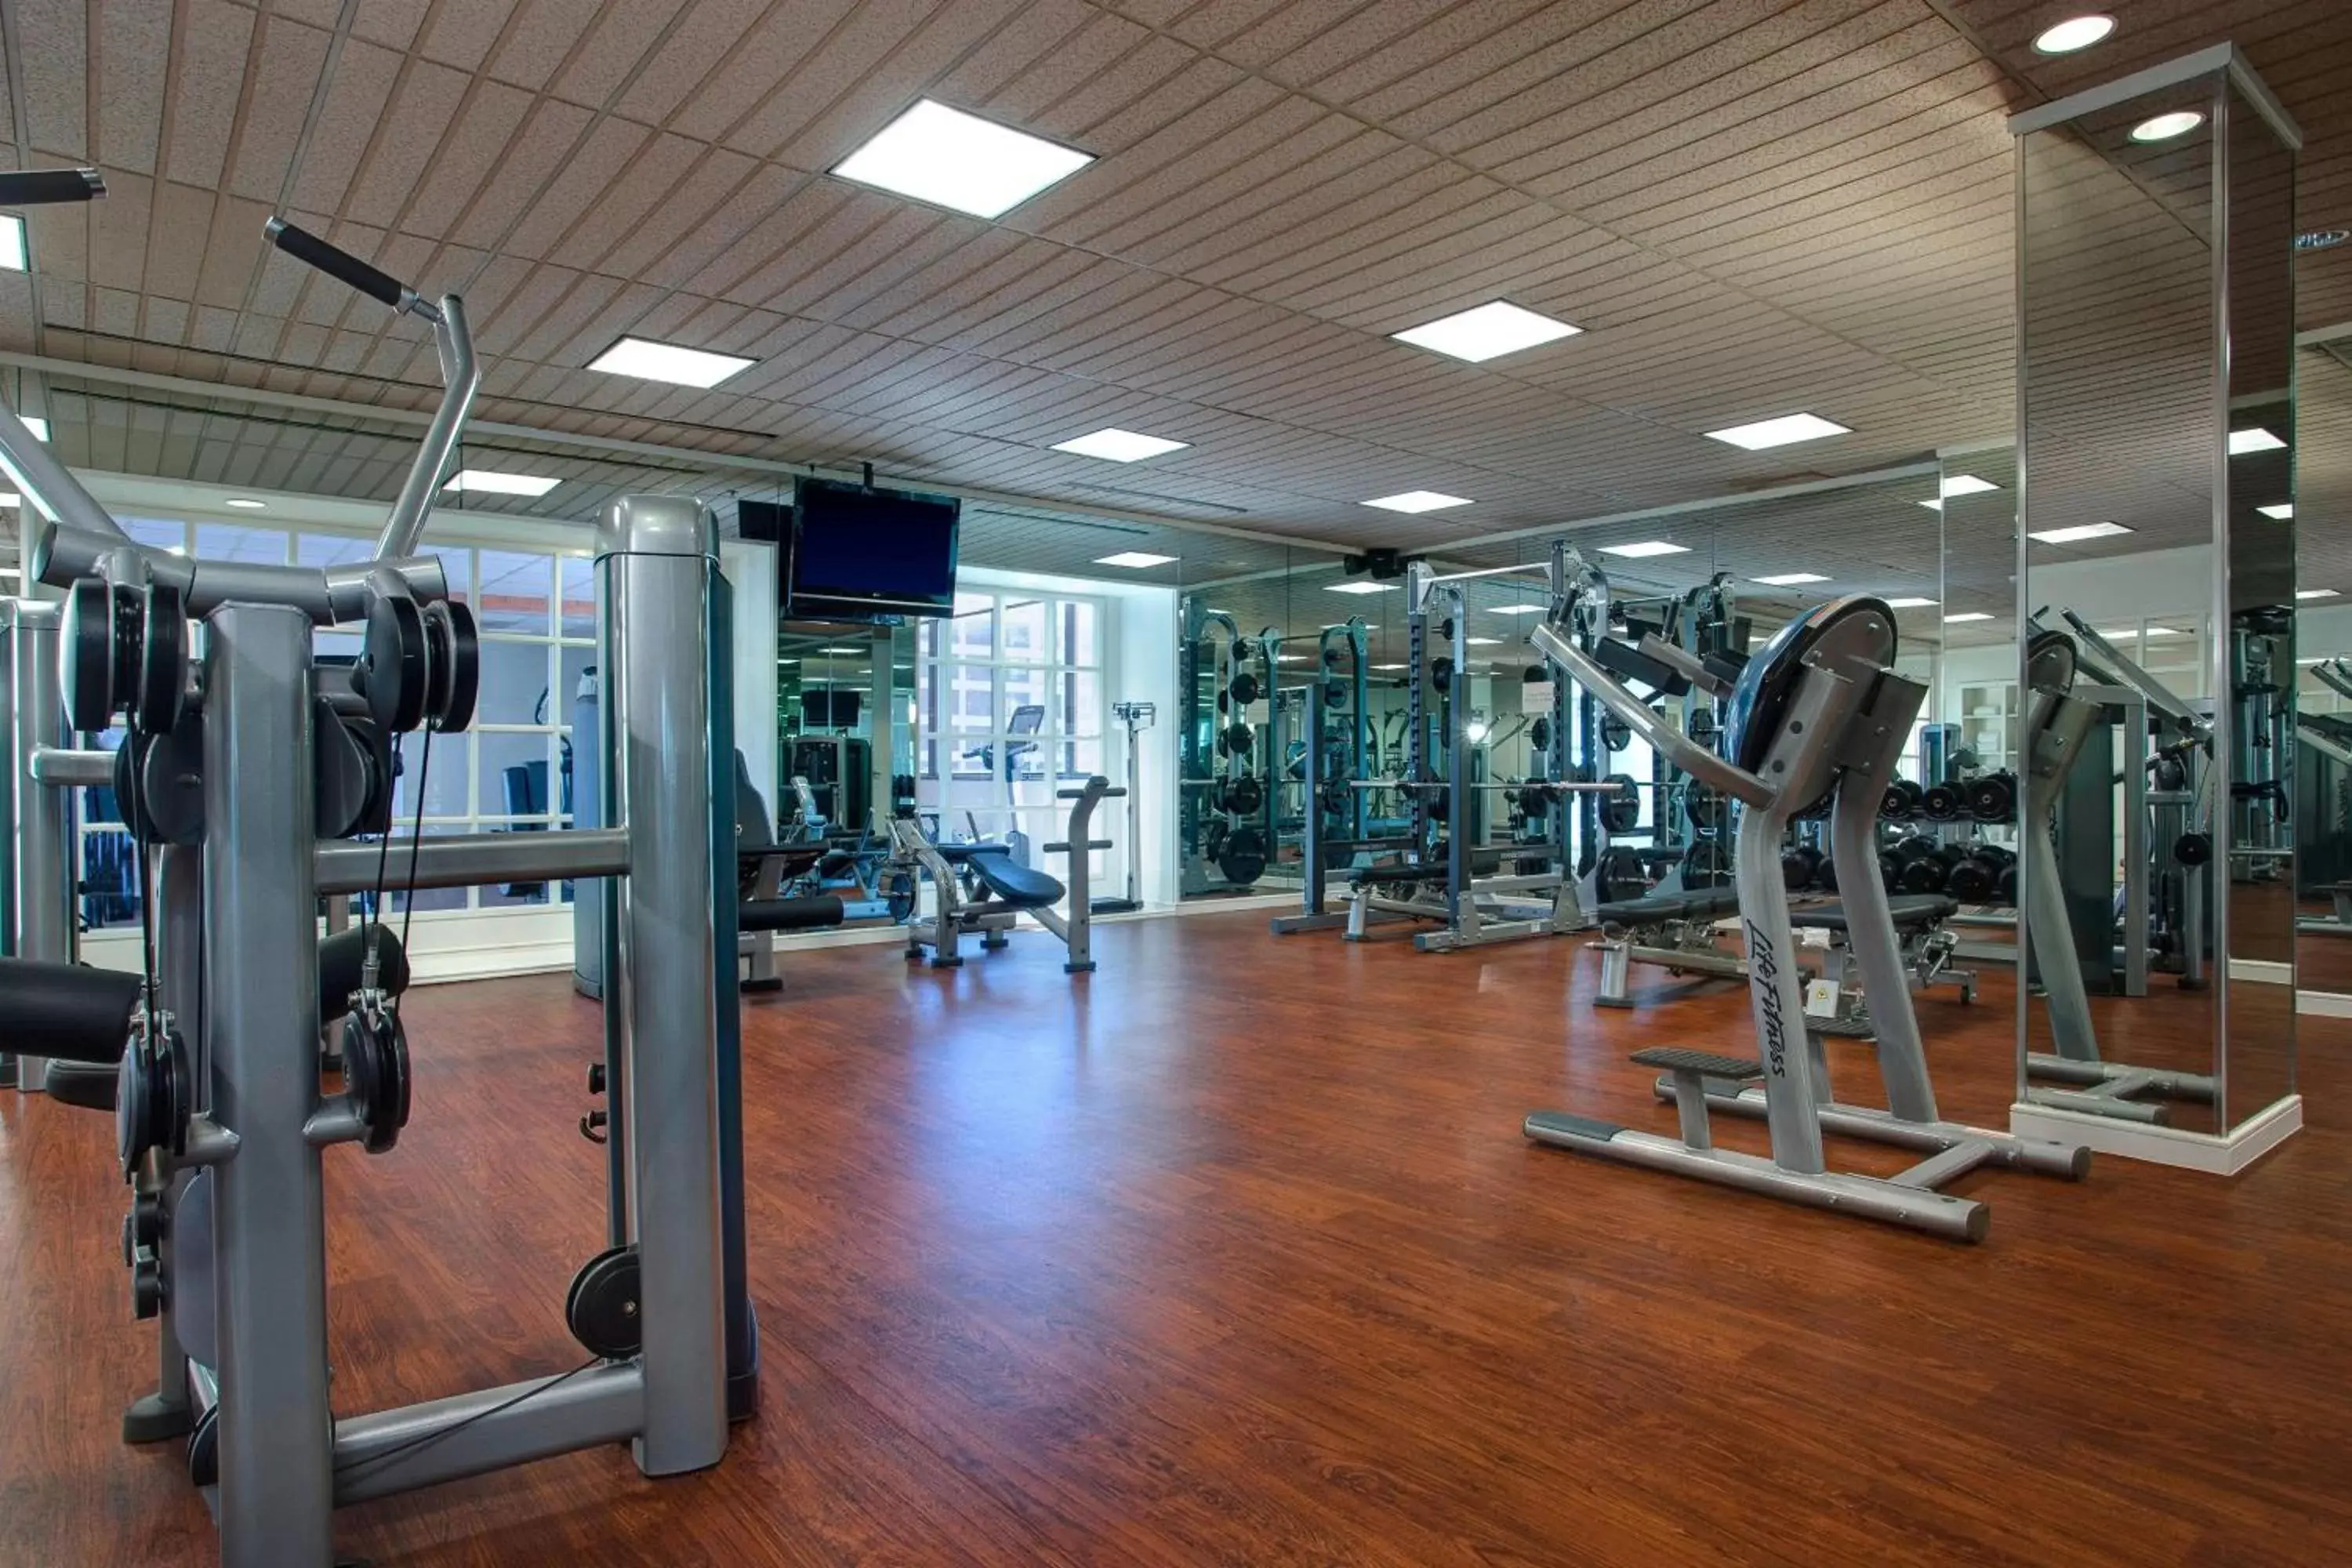 Fitness centre/facilities, Fitness Center/Facilities in JW Marriott Houston by the Galleria